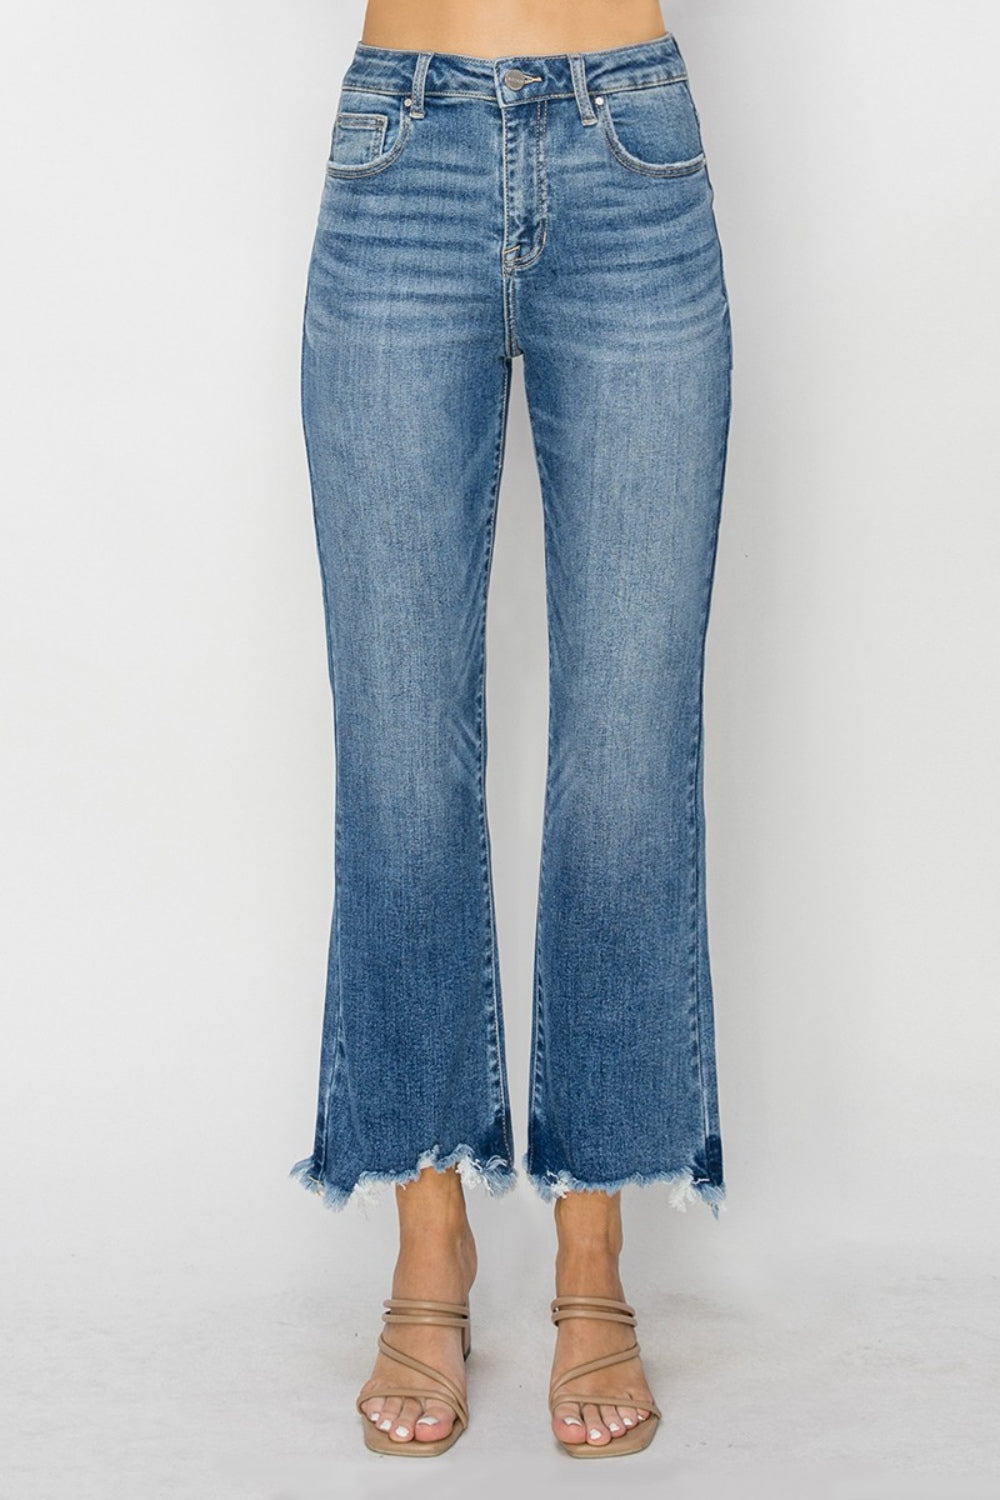 RISEN High Waist Raw Hem Flare Jeans free shipping -Oh Em Gee Boutique